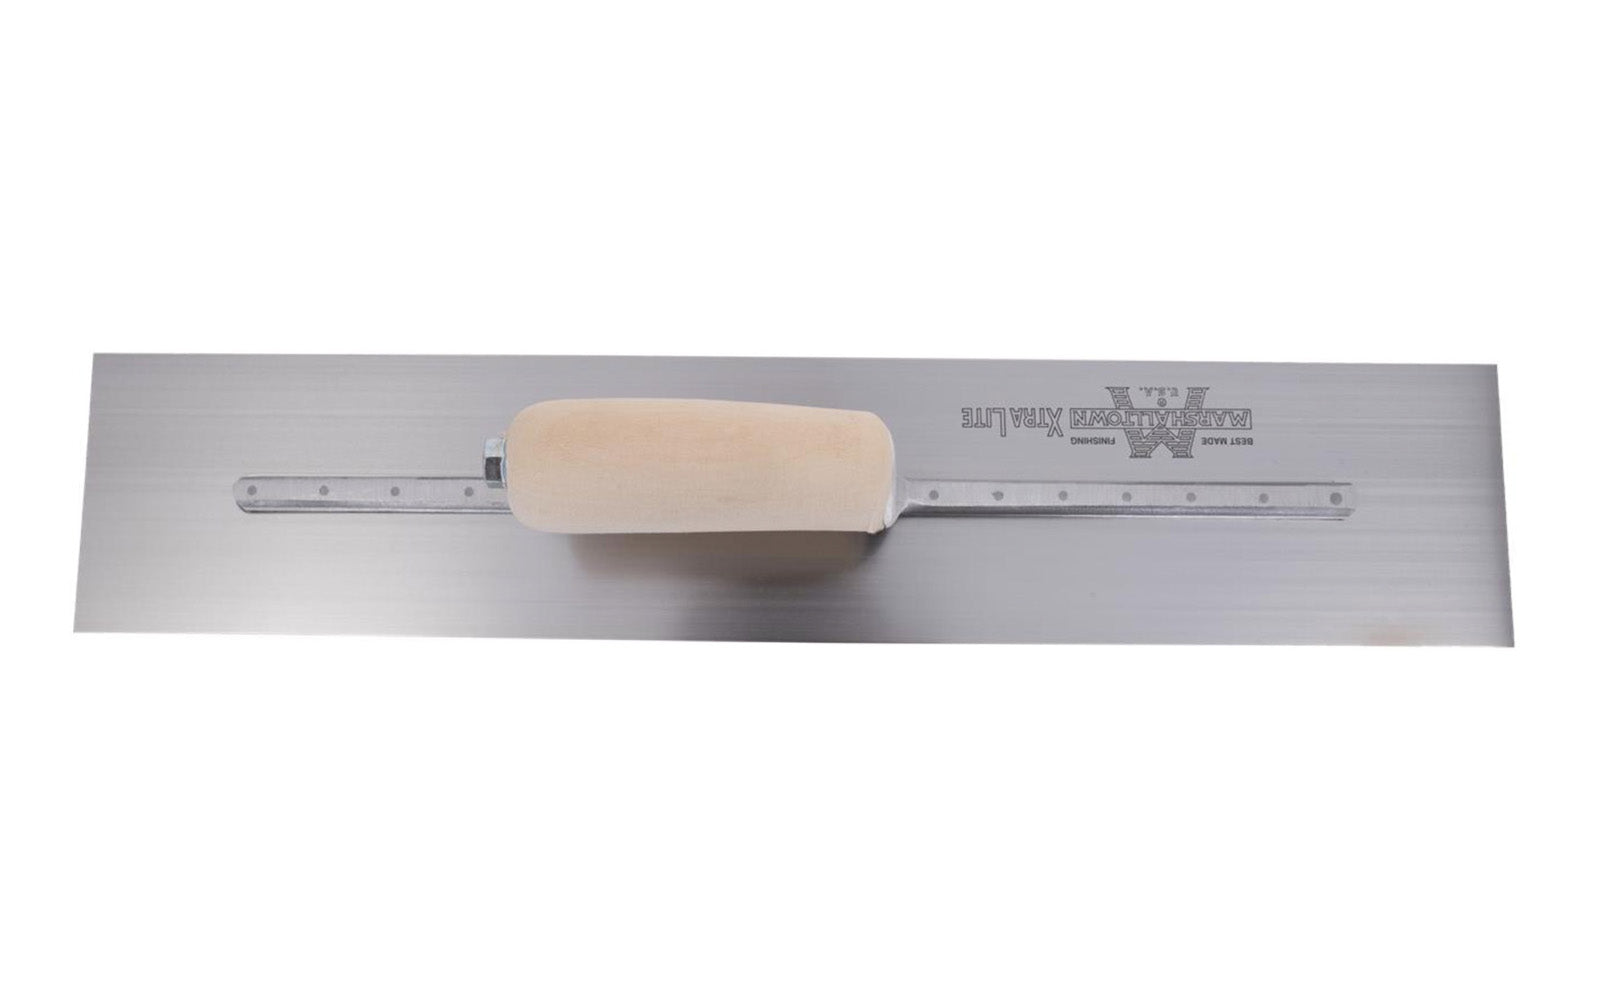 Marshalltown 20" x 4" Finishing Trowel with a blade that is tempered, ground, and polished for enhanced performance. MXS20.